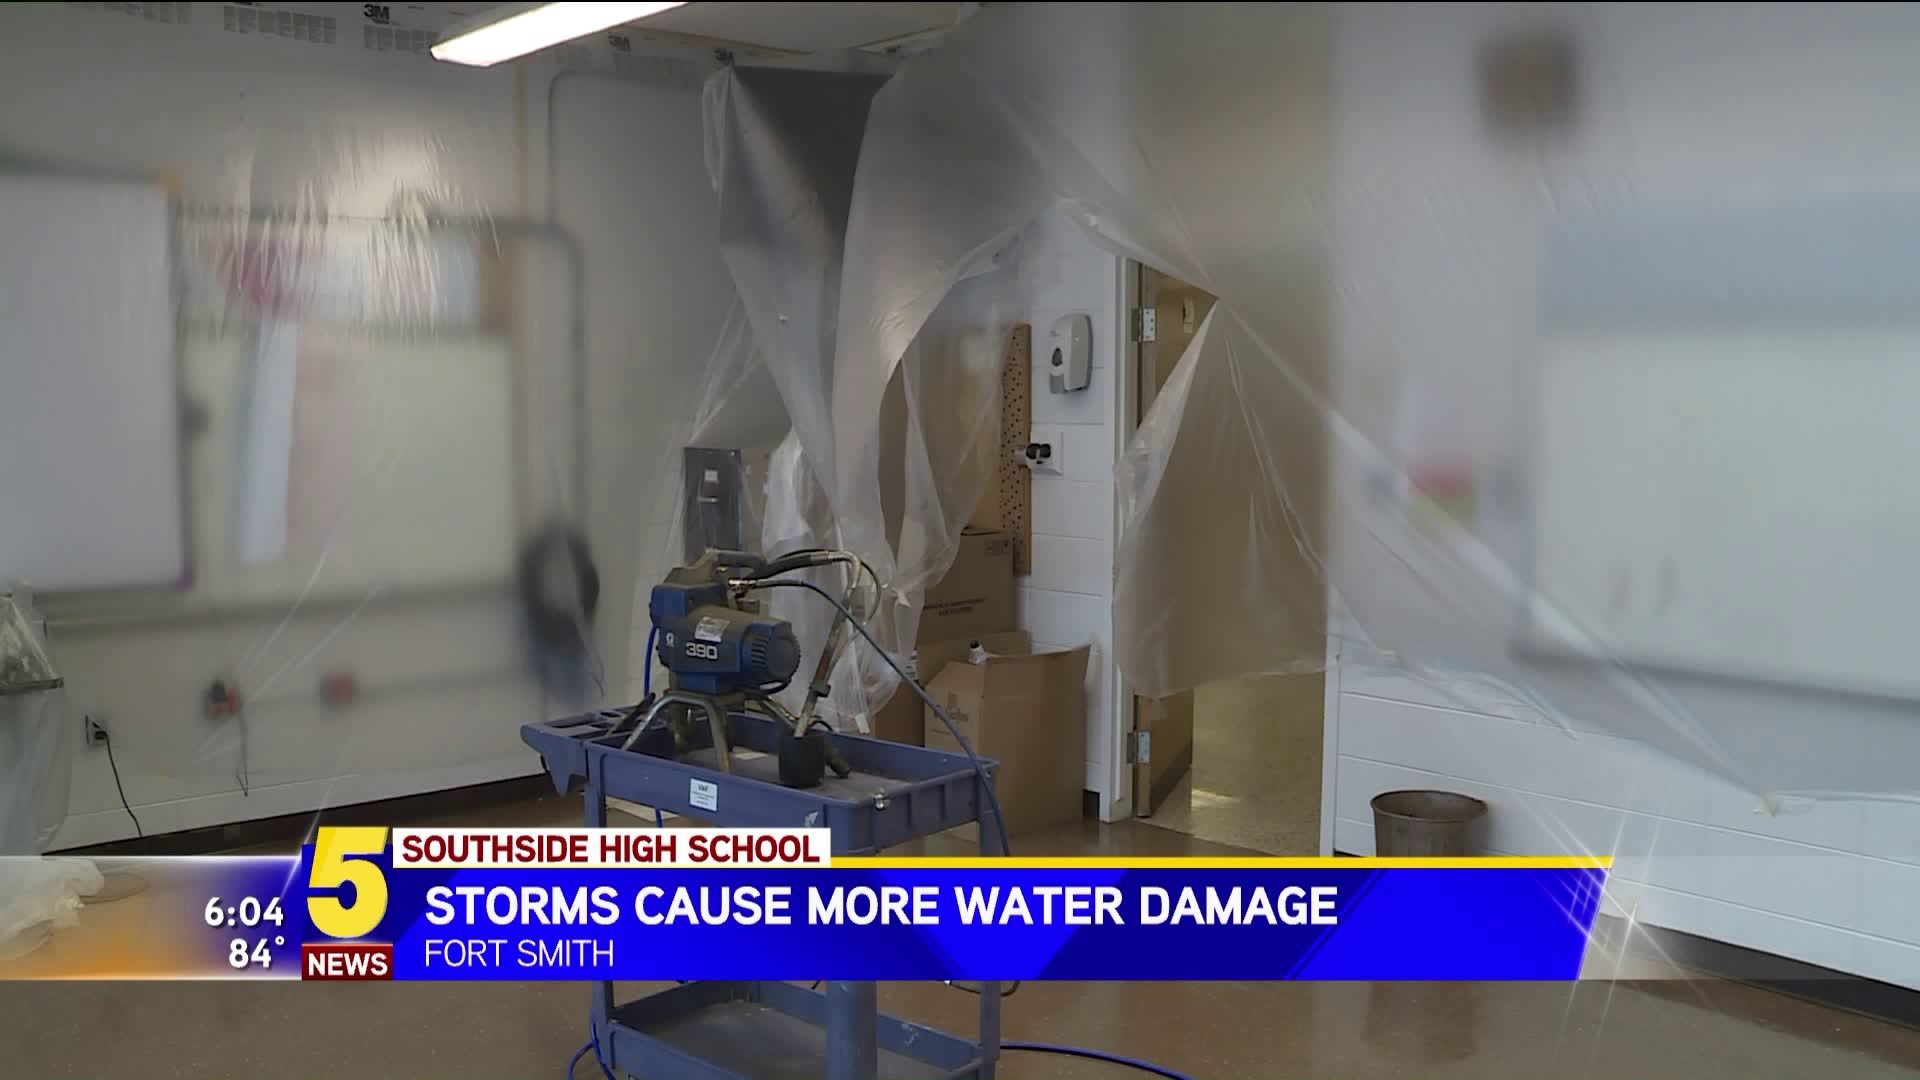 Storms Cause More Water Damage